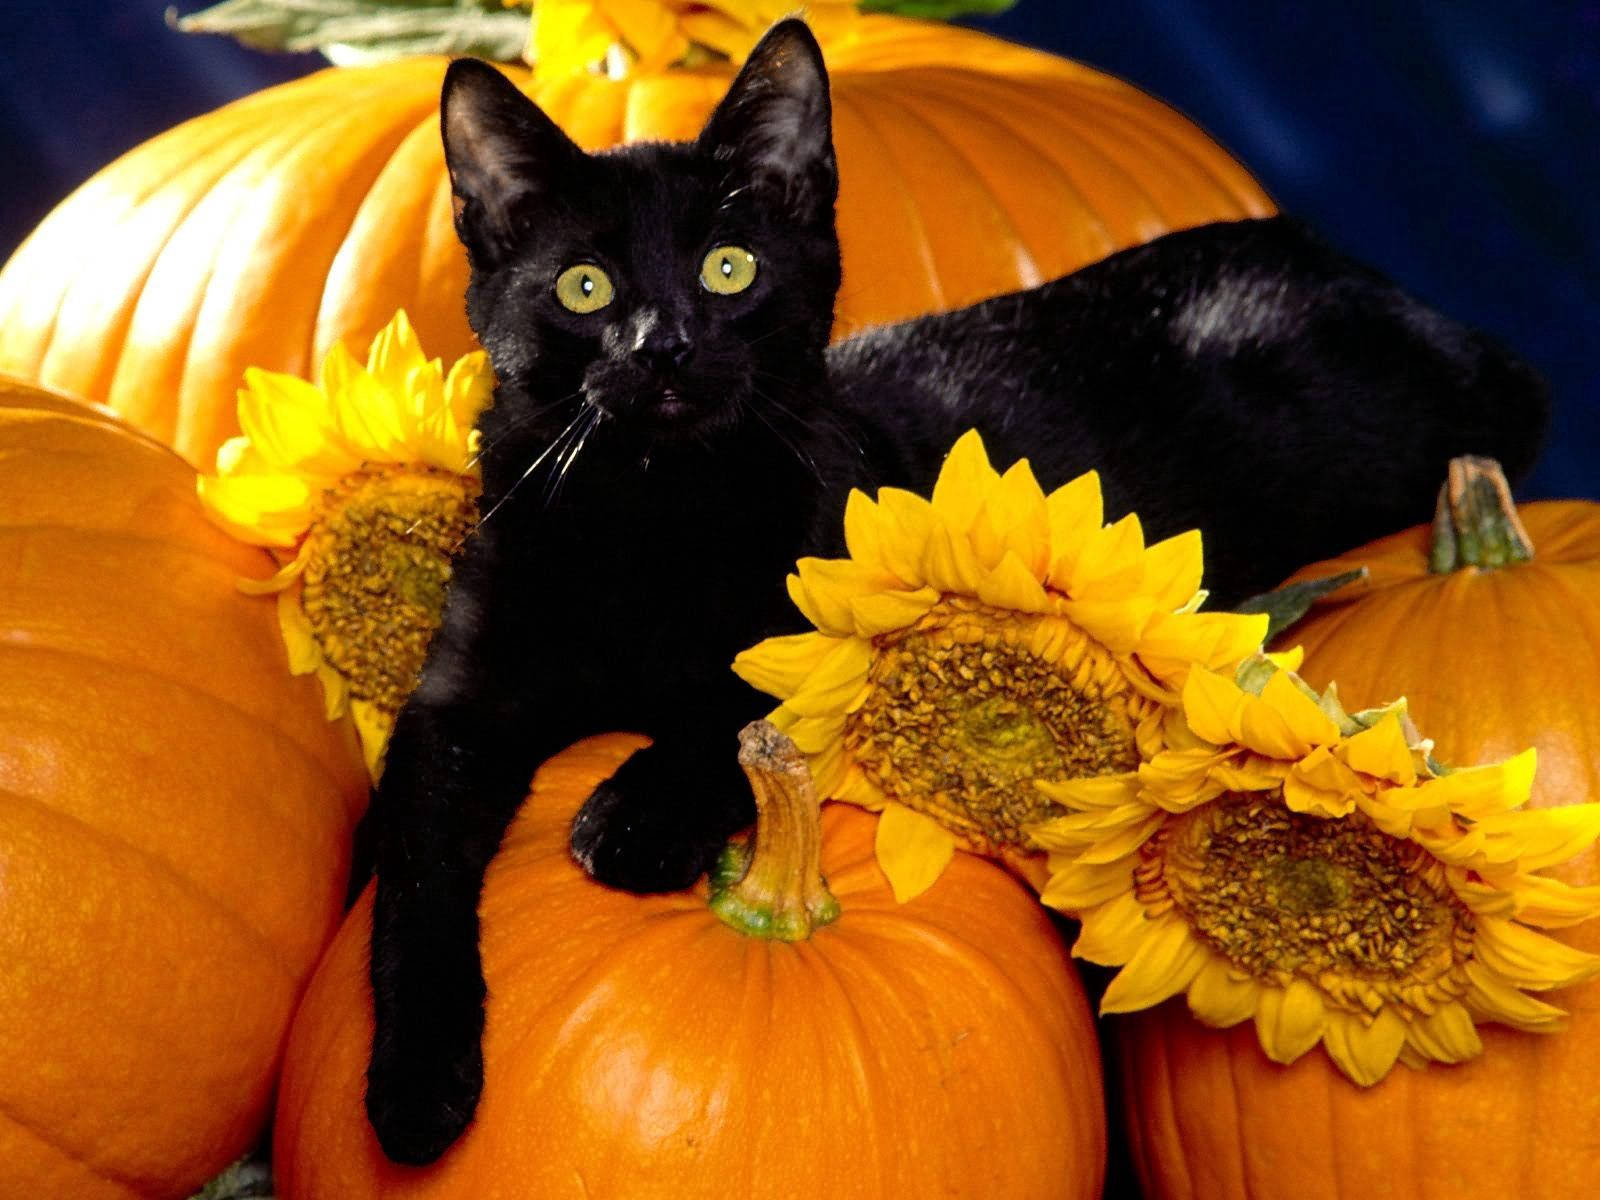 This Halloween Season, One Of The Spookiest Decorations We Have Is Our Black Cat Atop A Pumpkin.